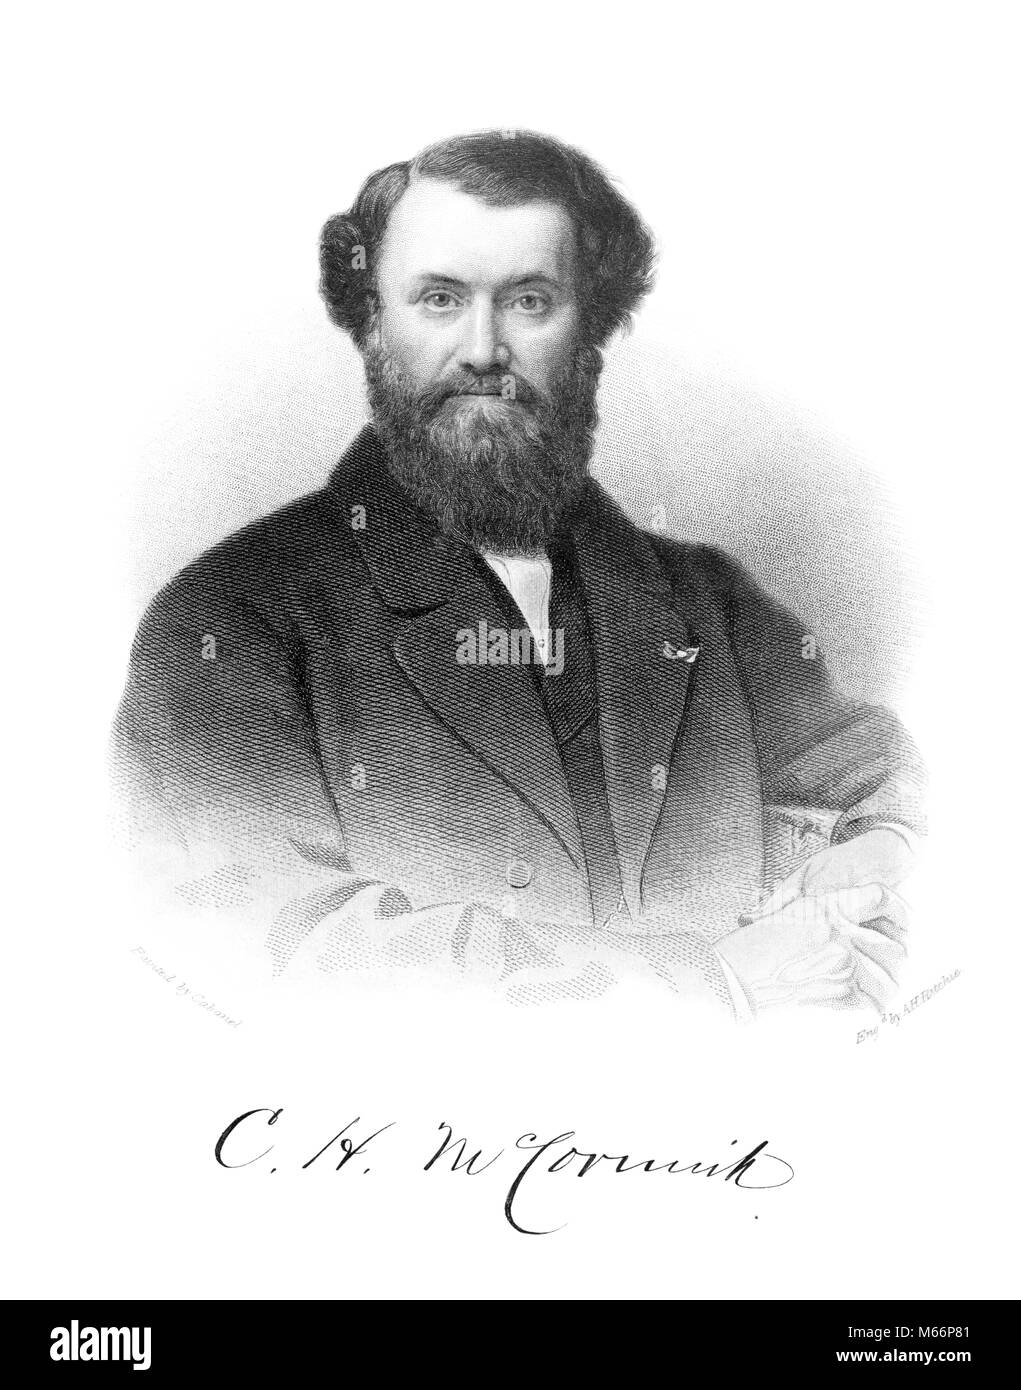 1840s PORTRAIT CYRUS H MCCORMICK INVENTOR MANUFACTURER OF FARM REAPING MACHINE LOOKING AT CAMERA - q59294 CPC001 HARS INNOVATION FACIAL HAIR CREATIVITY GROW IMAGINATION REAPER REAPING SALESMEN INVENTOR MALES 1840s A.H. B&W BLACK AND WHITE CABANEL CAUCASIAN ETHNICITY CYRUS ENGRAVING BY A.H. RITCHIE FAMOUS PERSON LOOKING AT CAMERA MANUFACTURER MCCORMICK OCCUPATIONS OLD FASHIONED PERSONALITIES PERSONS PICTURE BY CABANEL RITCHIE Stock Photo